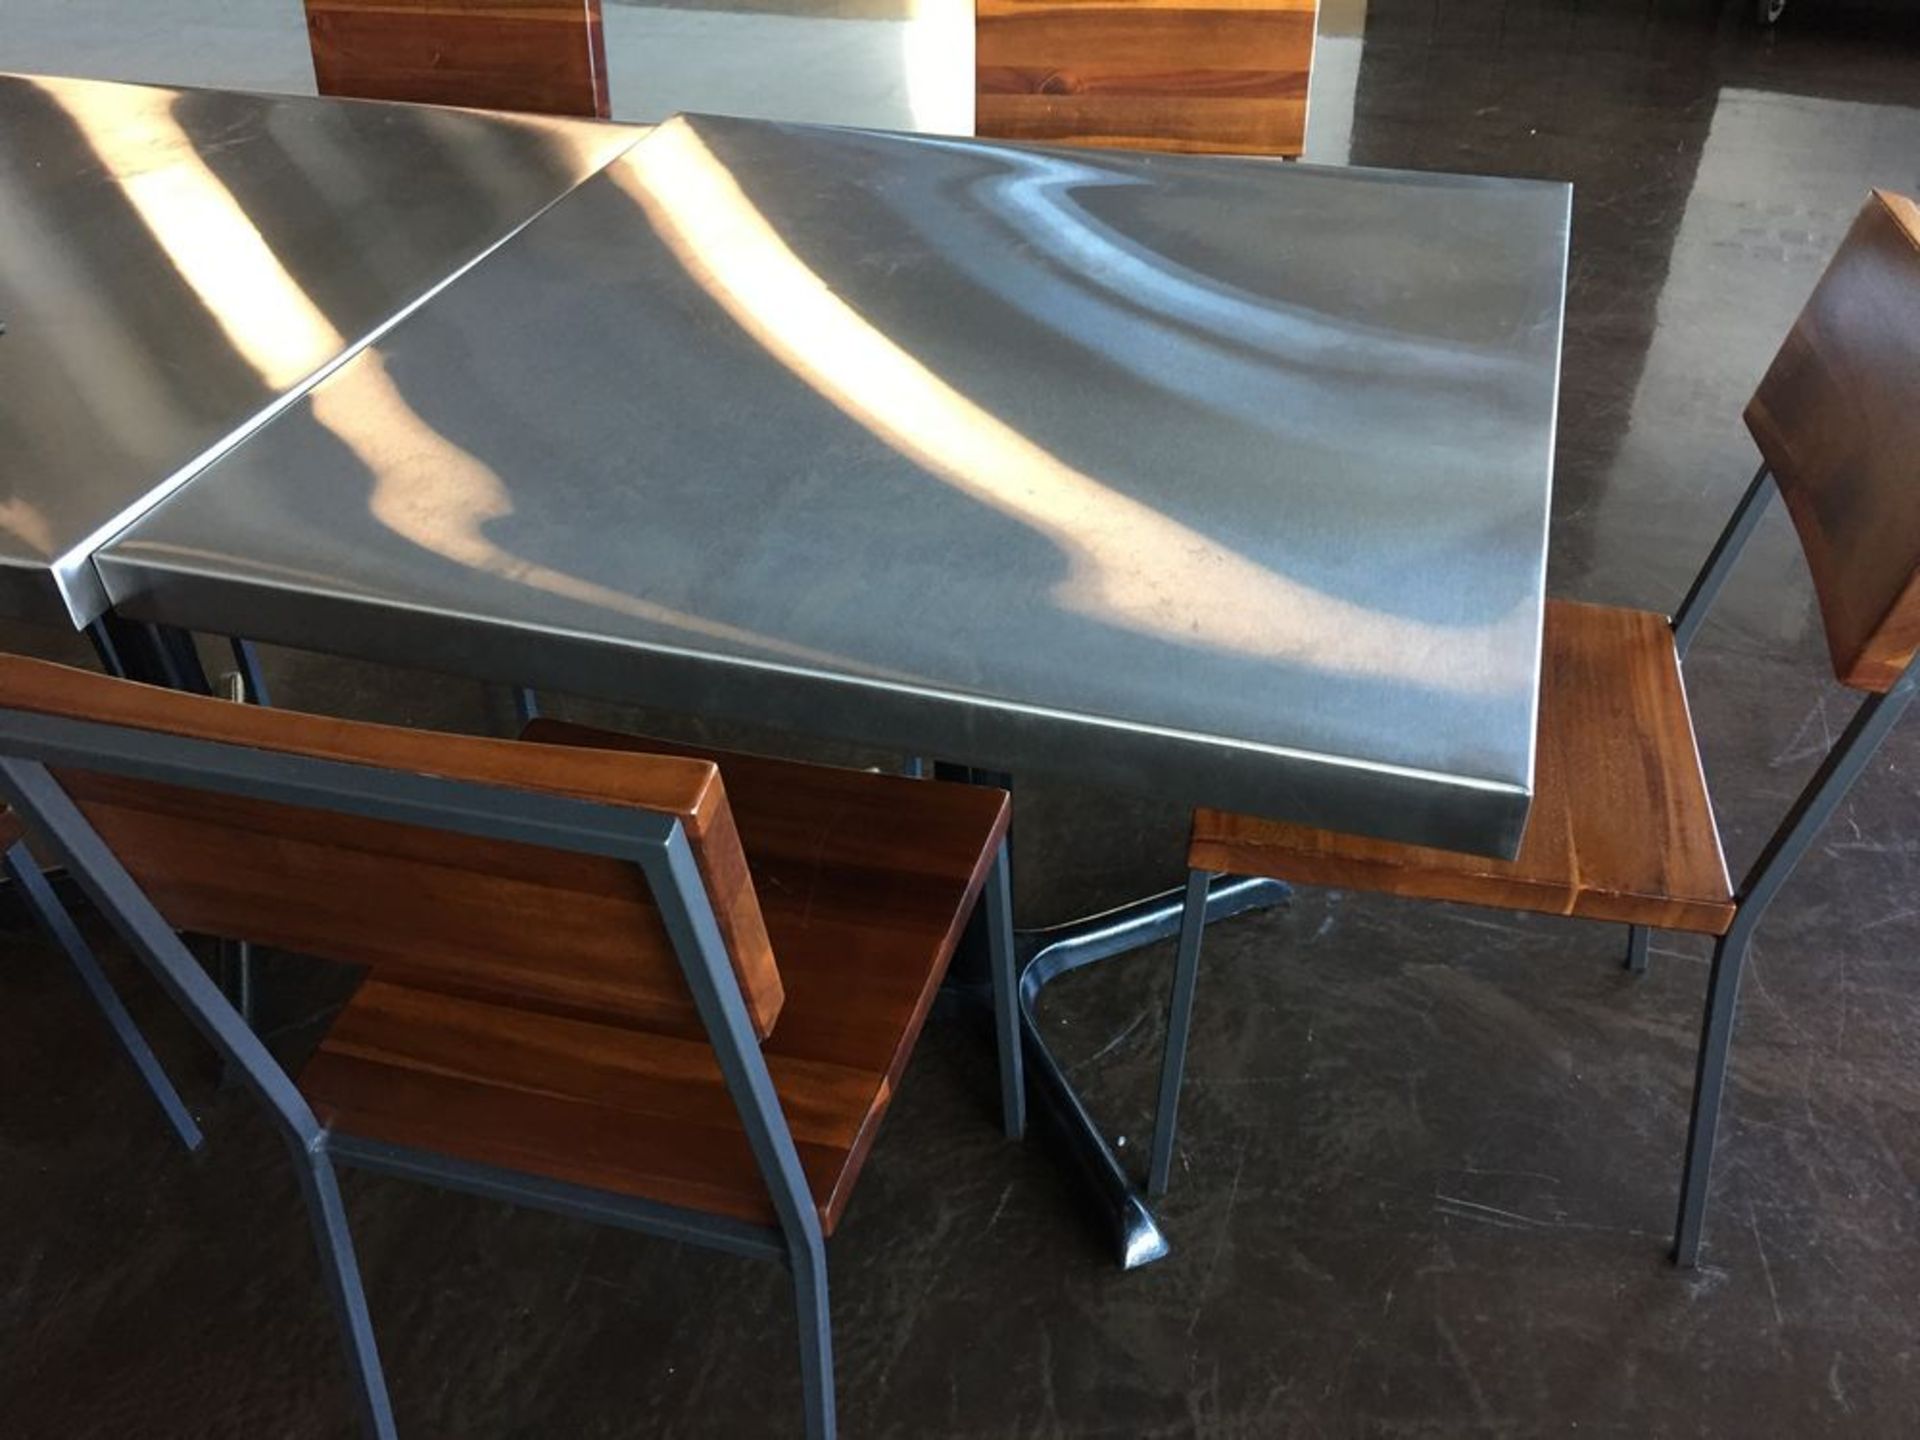 Furniture Asset: LOT OF: 2 qty: Table Silver D. Table 4-Top, 24"W x 36"D x 28"H, Orig price: $